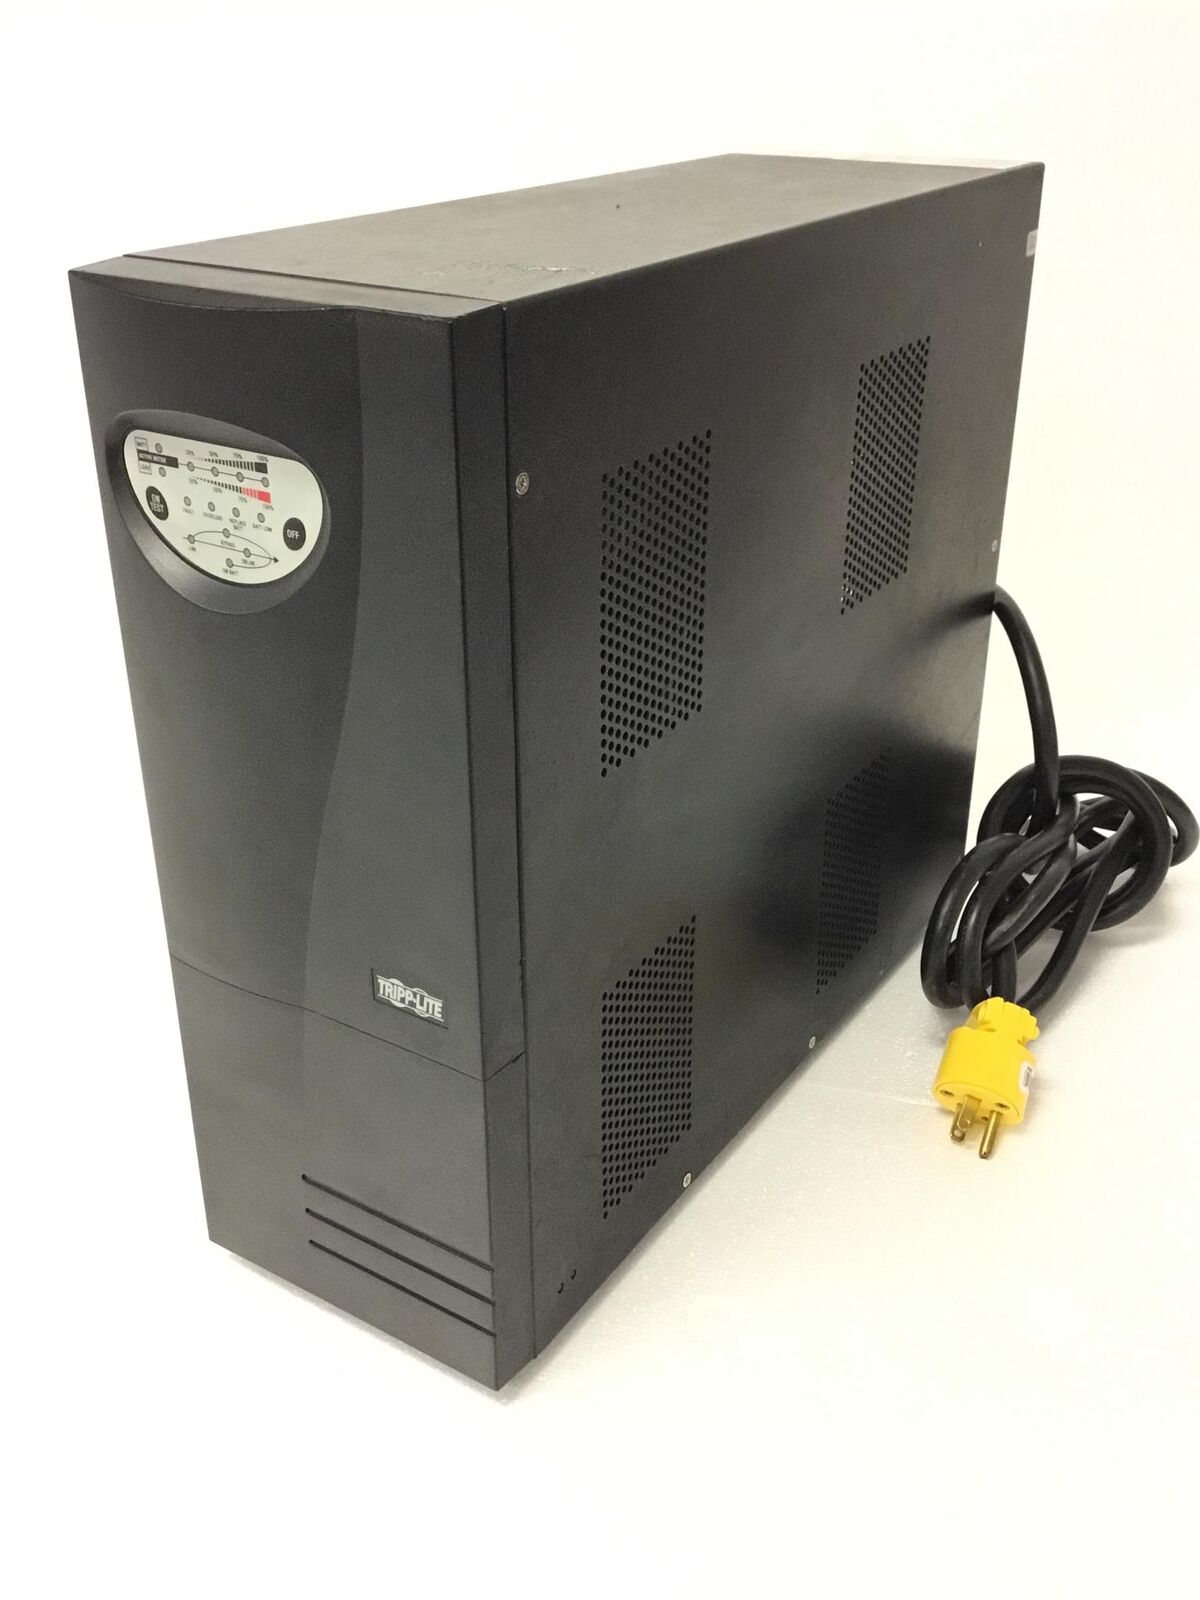 TRIPP LITE SU2200XL 6 Outlet UPS Uninterruptible Power Supply w/Cable,no Battery